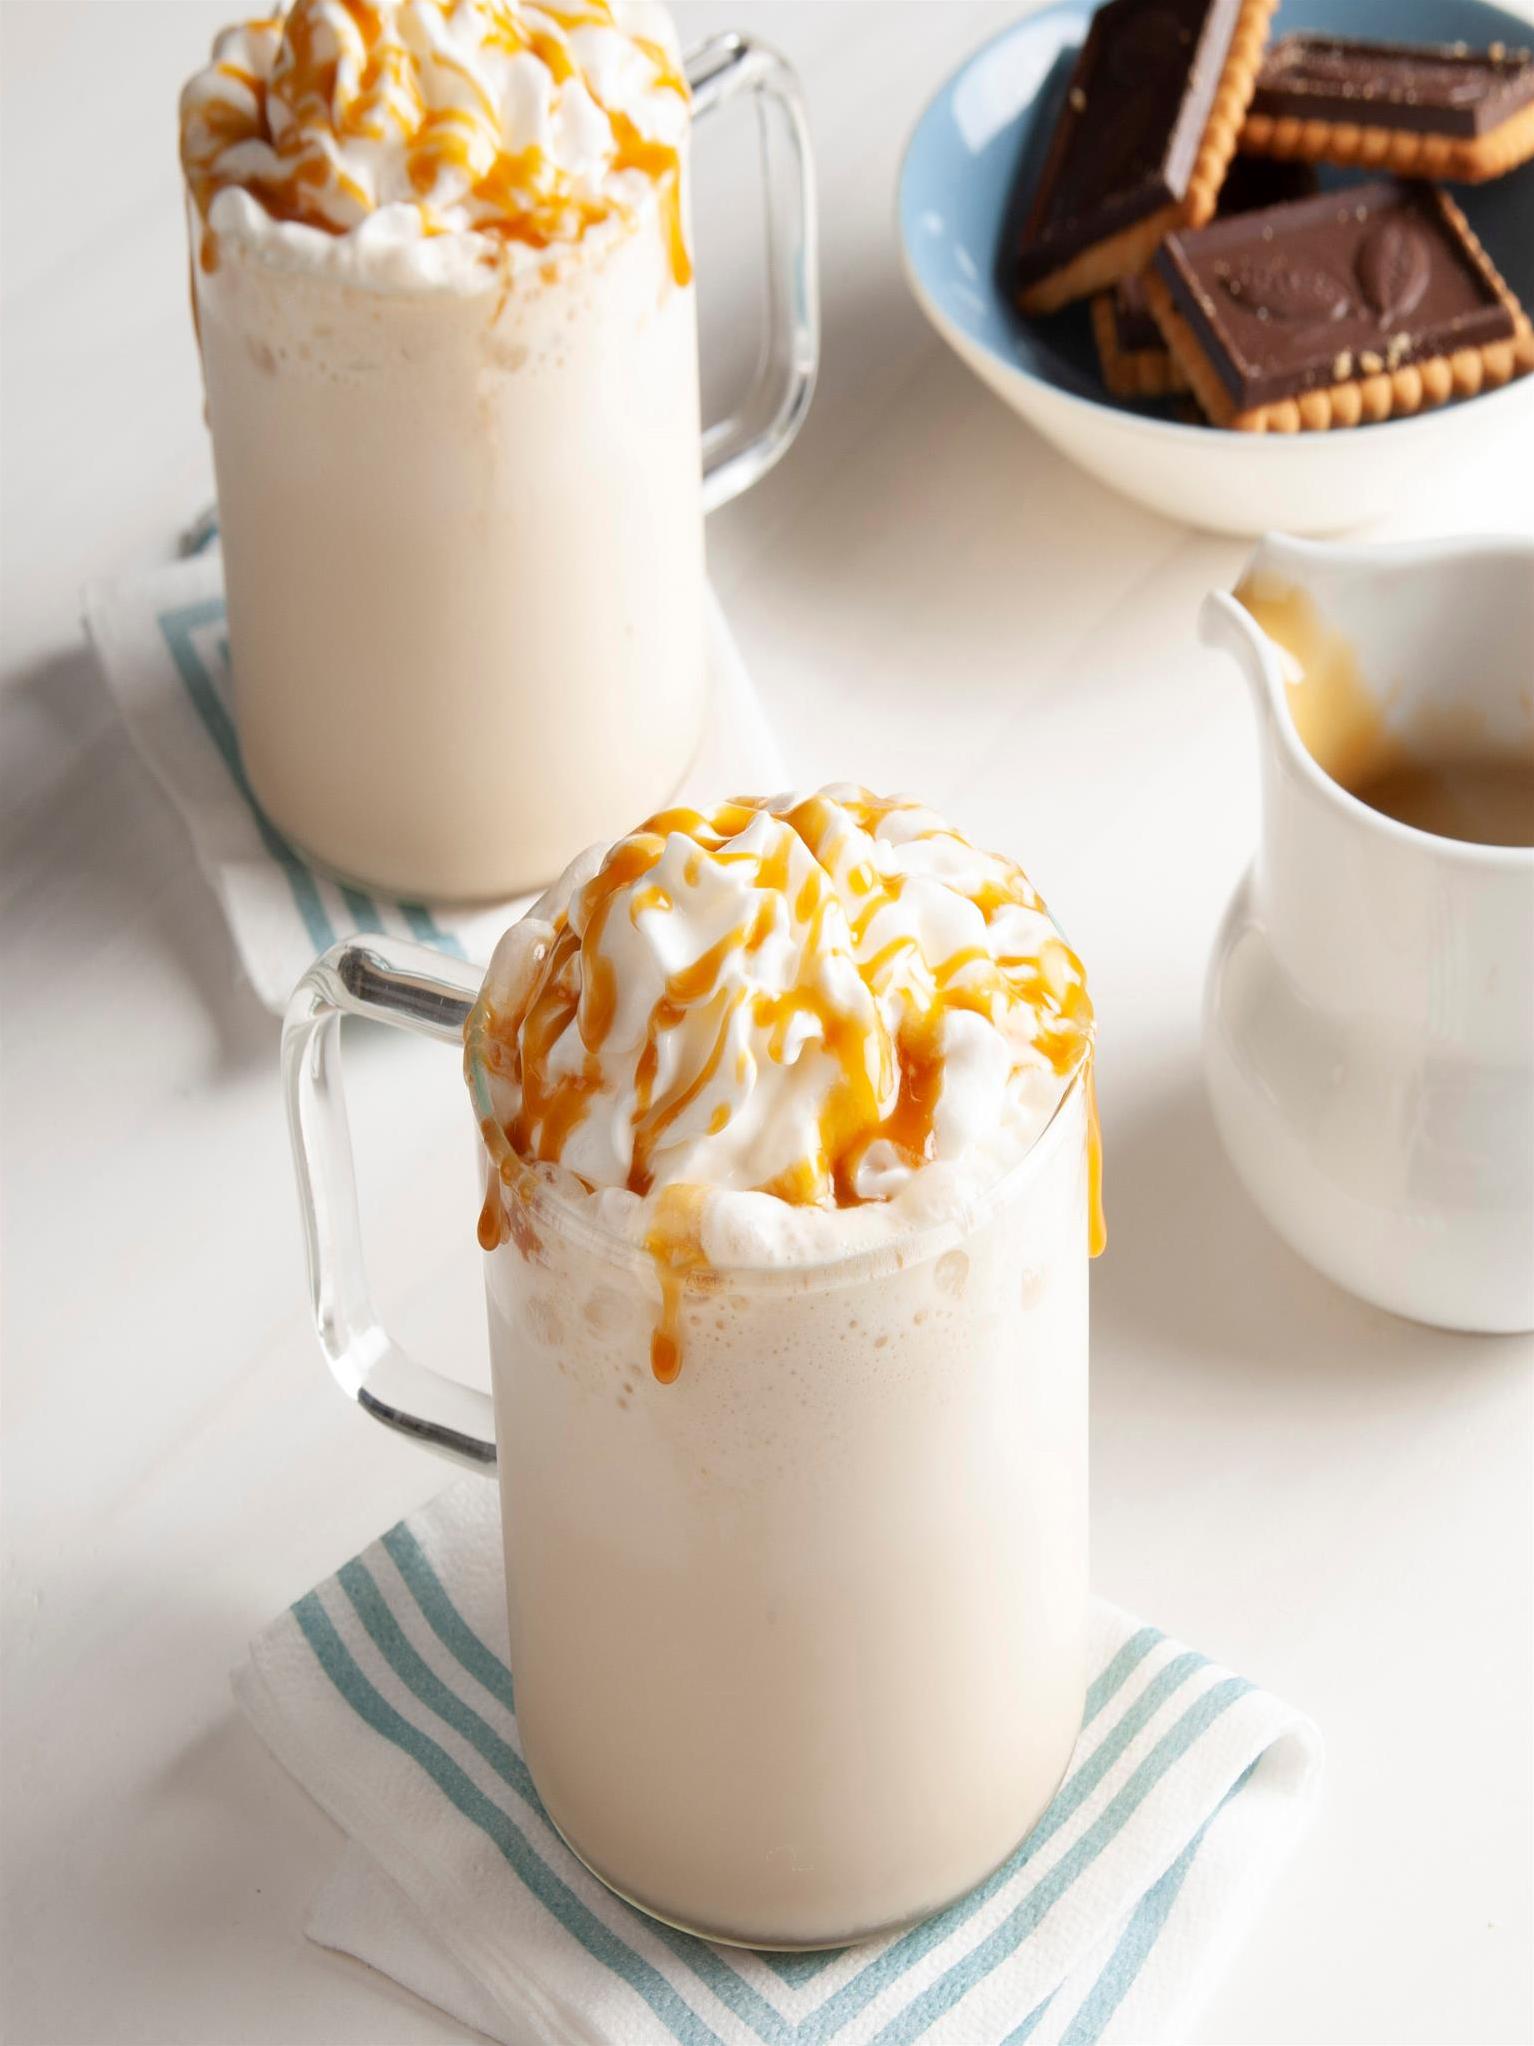  A blend of coffee, ice cream and milk- this cappuccino shake is a decadent delight!